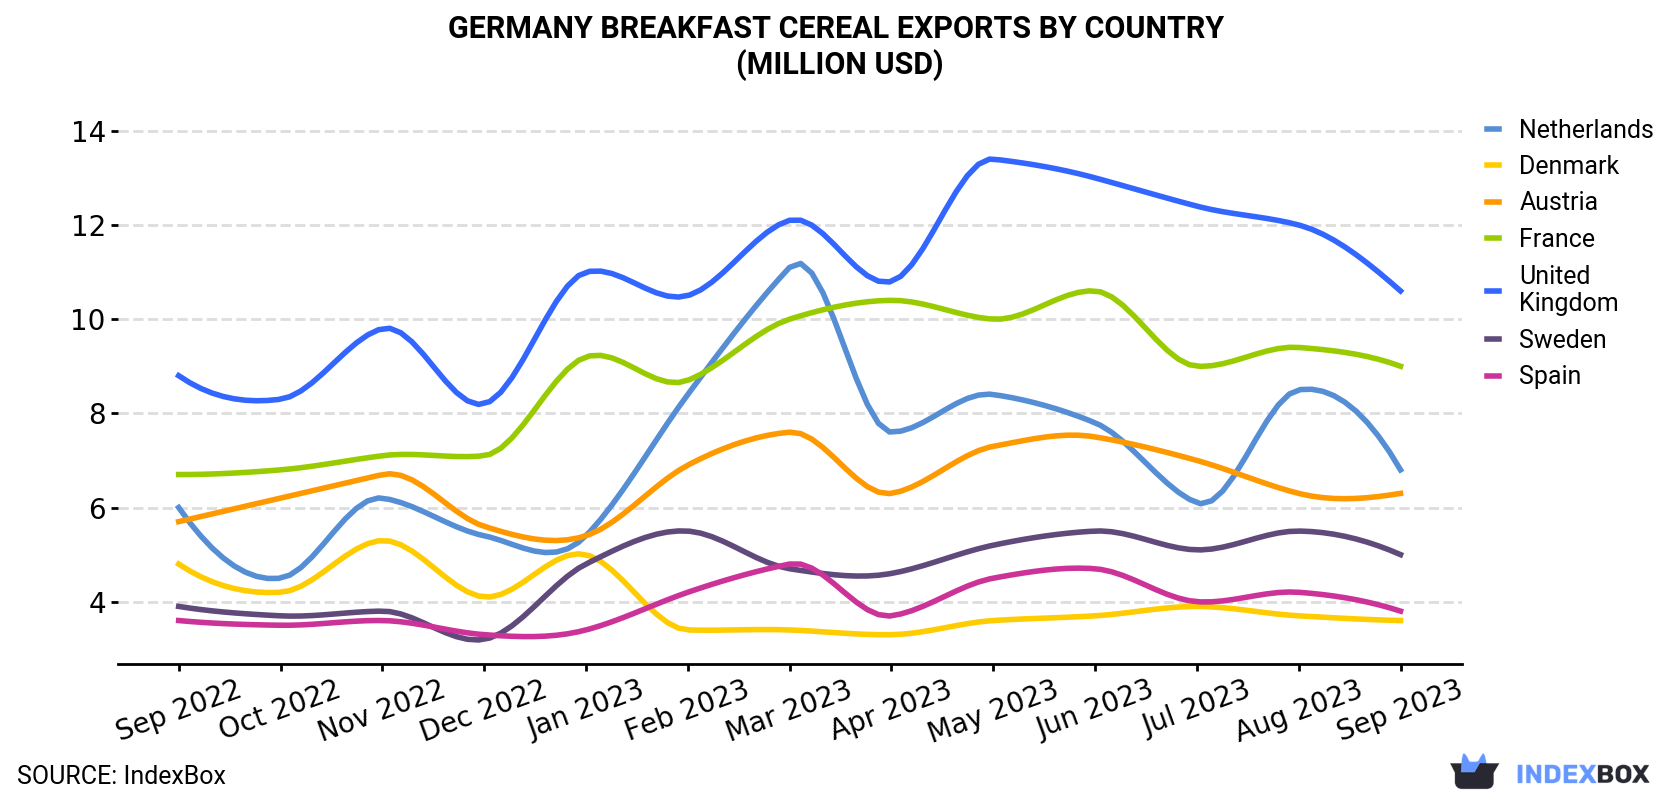 Germany Breakfast Cereal Exports By Country (Million USD)